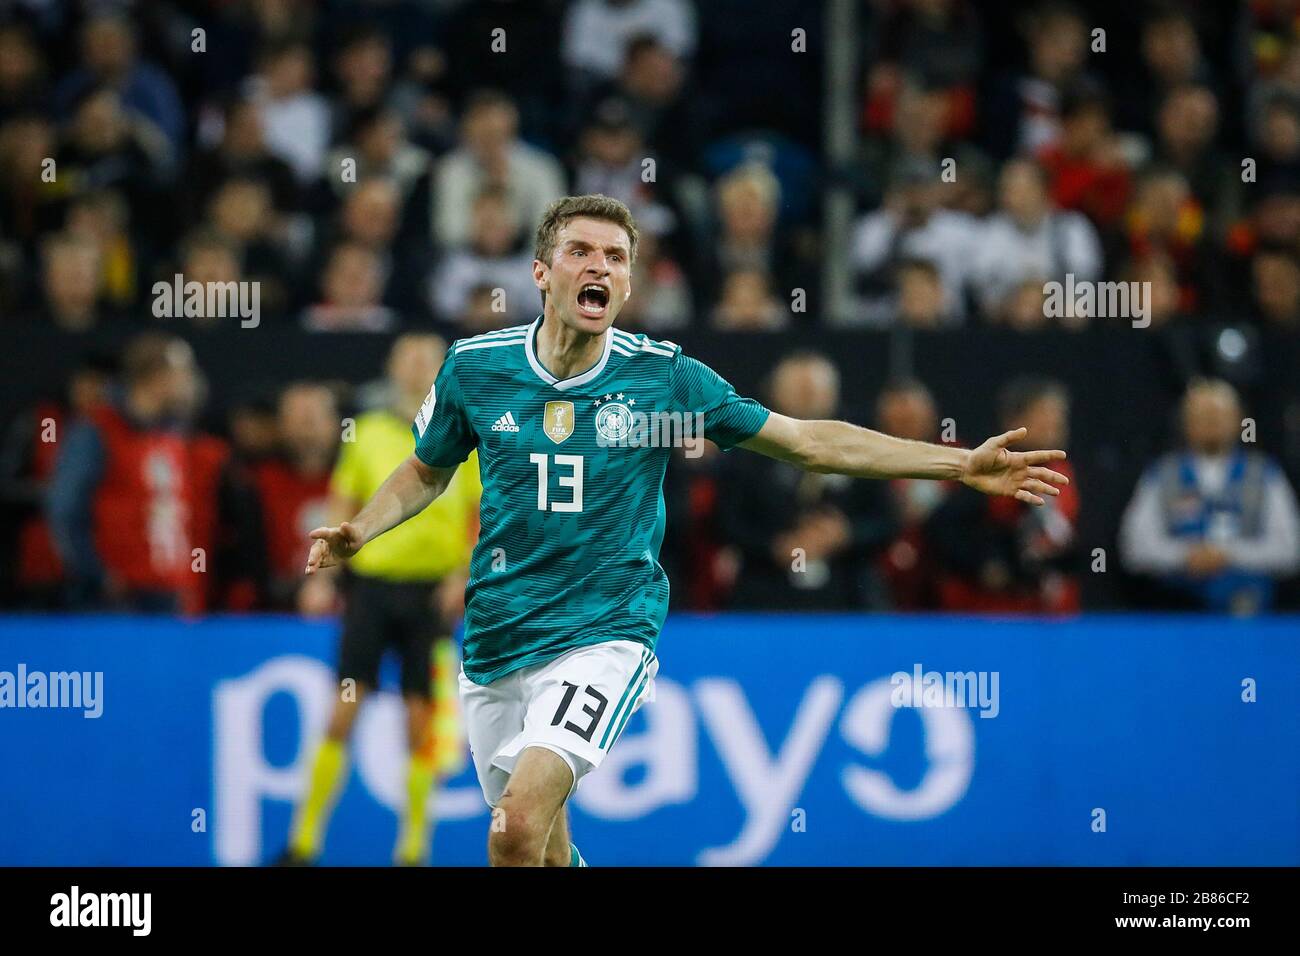 Thomas Mueller of Germany reacts during the friendly match between Germany and Spain, Espritarena in Duesseldorf on March 23., 2018.  LŠnderspiel Deut Stock Photo